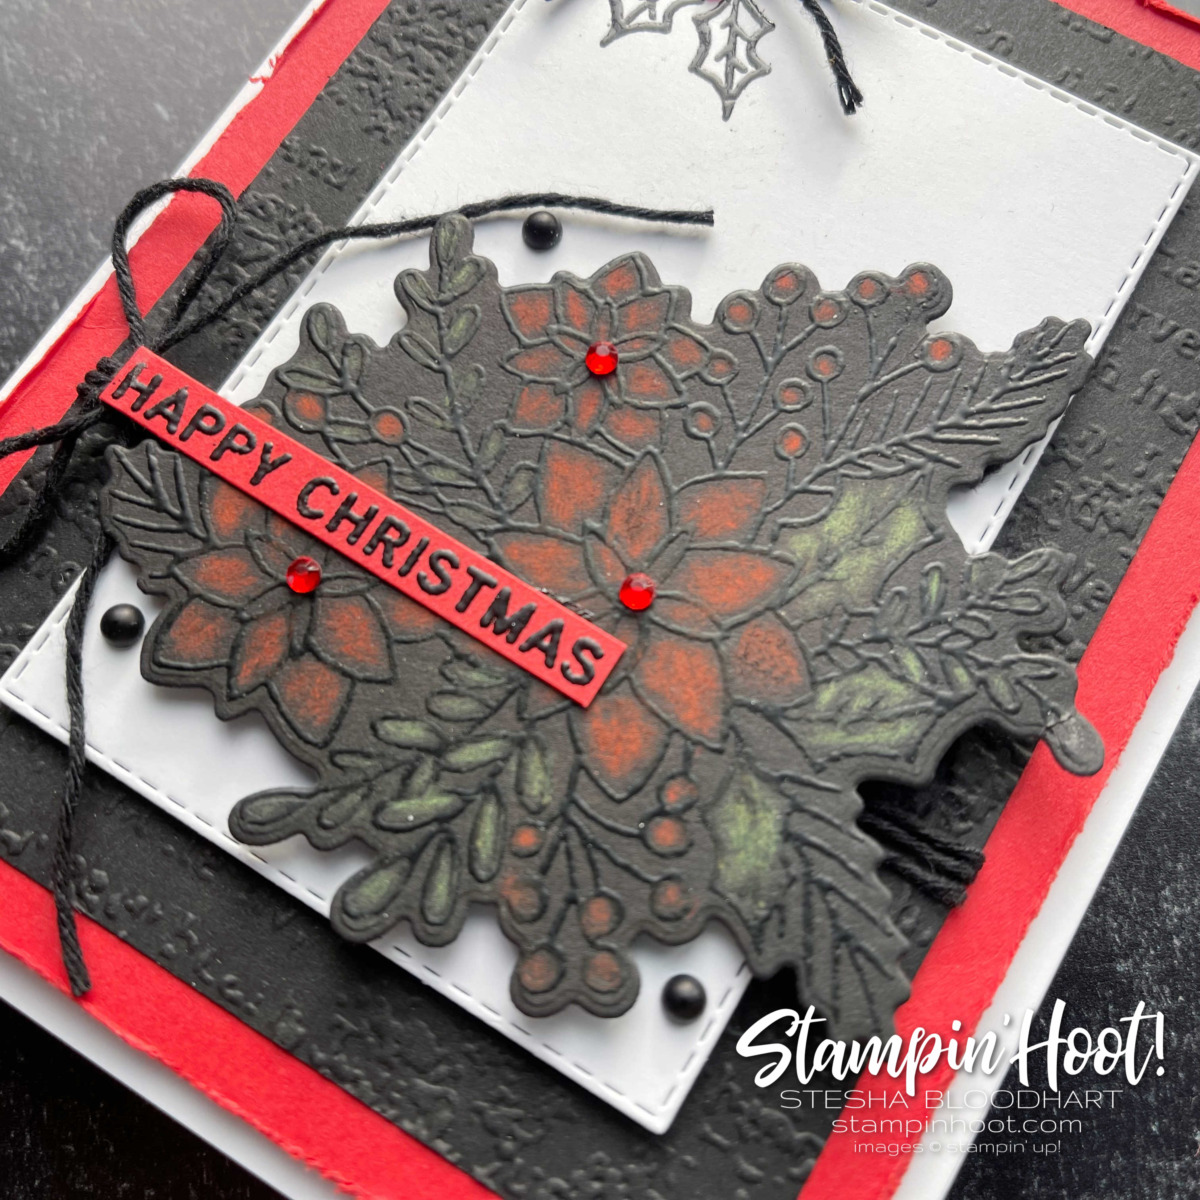 Create this card using Soft Pastels and Words of Cheer Bundle by Stampin' Up! Card by Stesha Bloodhart, Stampin' Hoot!